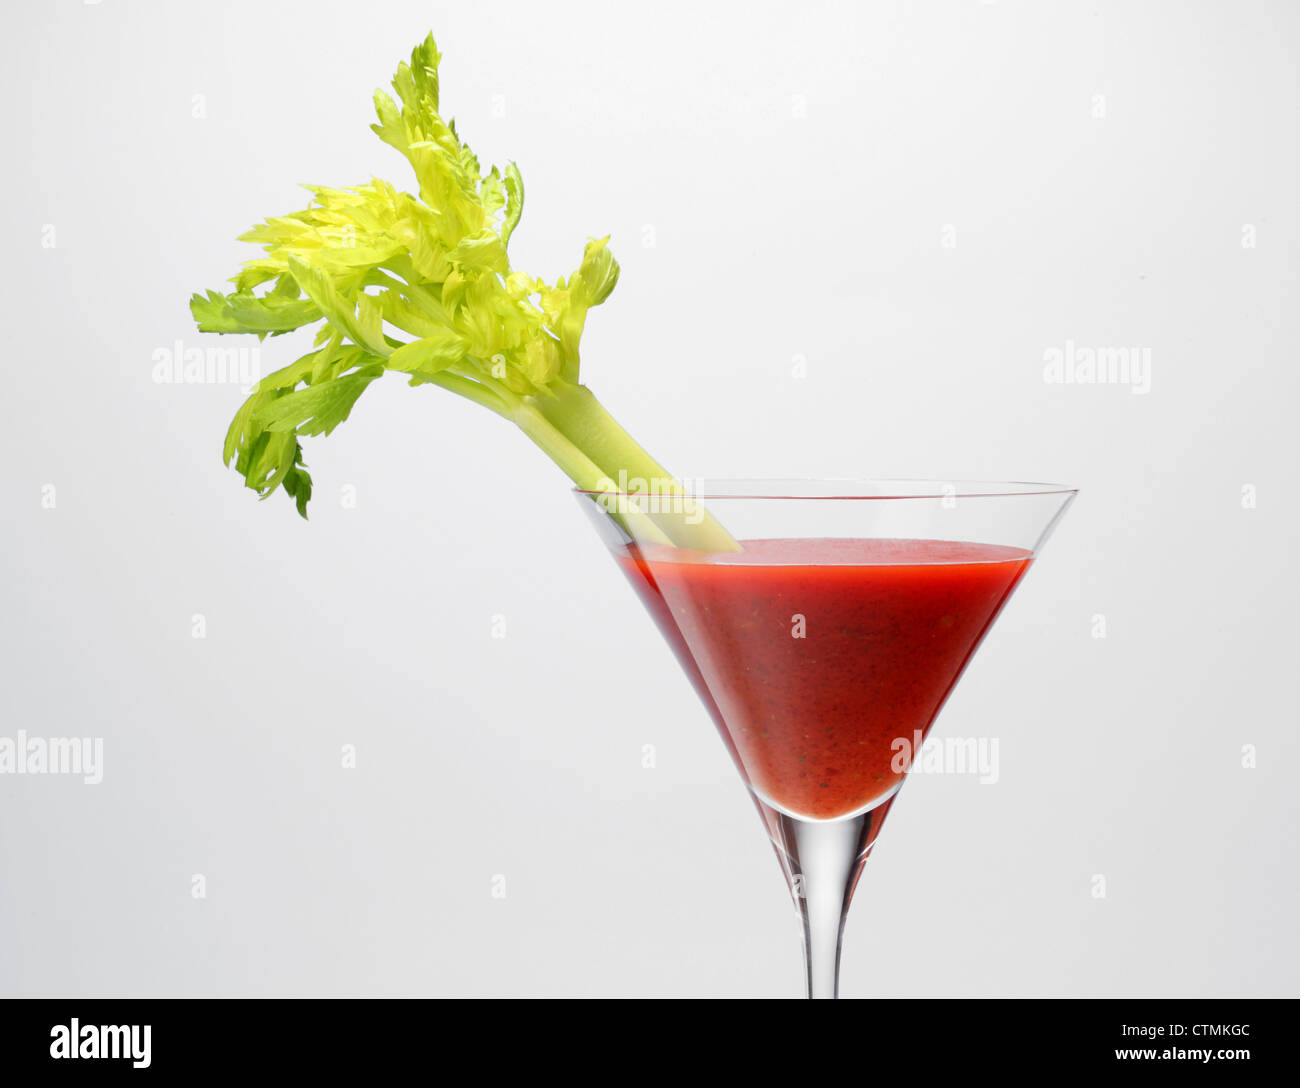 A  red vegetable juice in a stemmed glass with vegetable garnish. Celery stalk Stock Photo